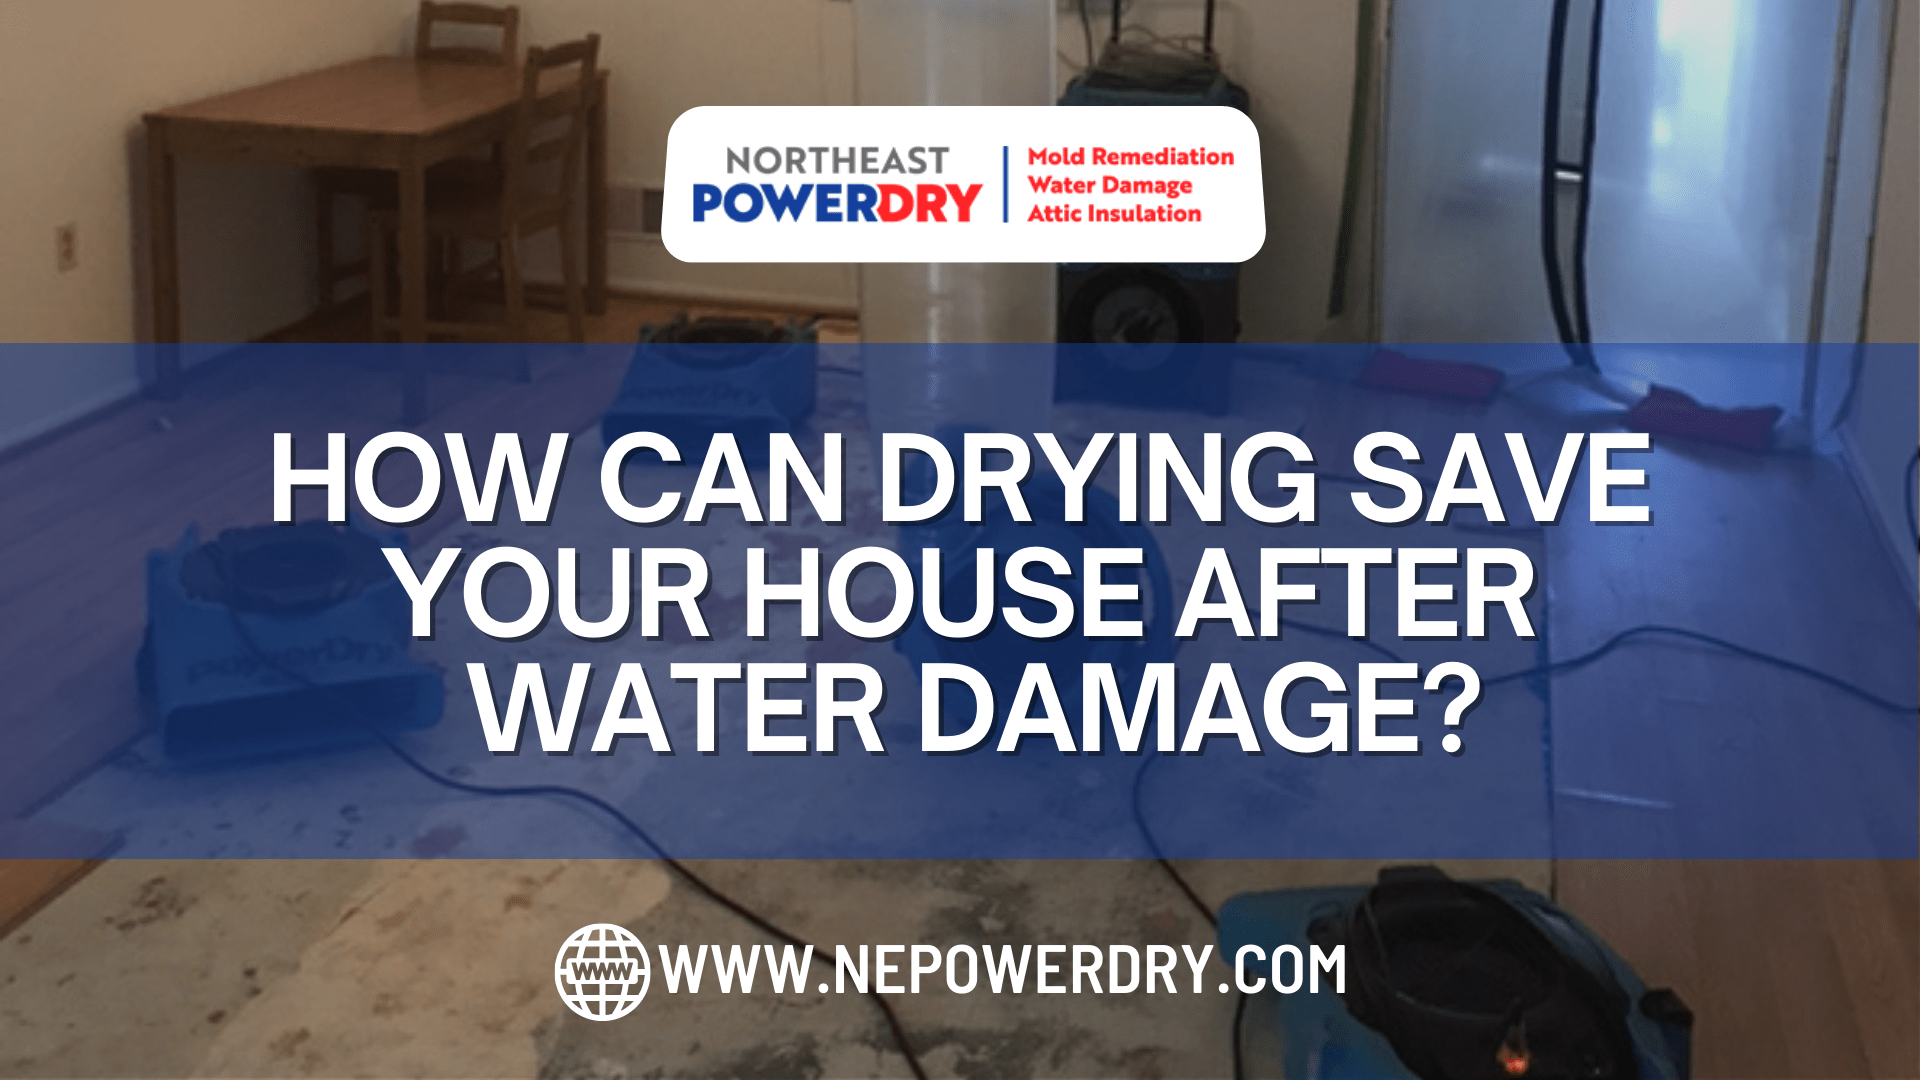 How Can Drying Save Your House After Water Damage?